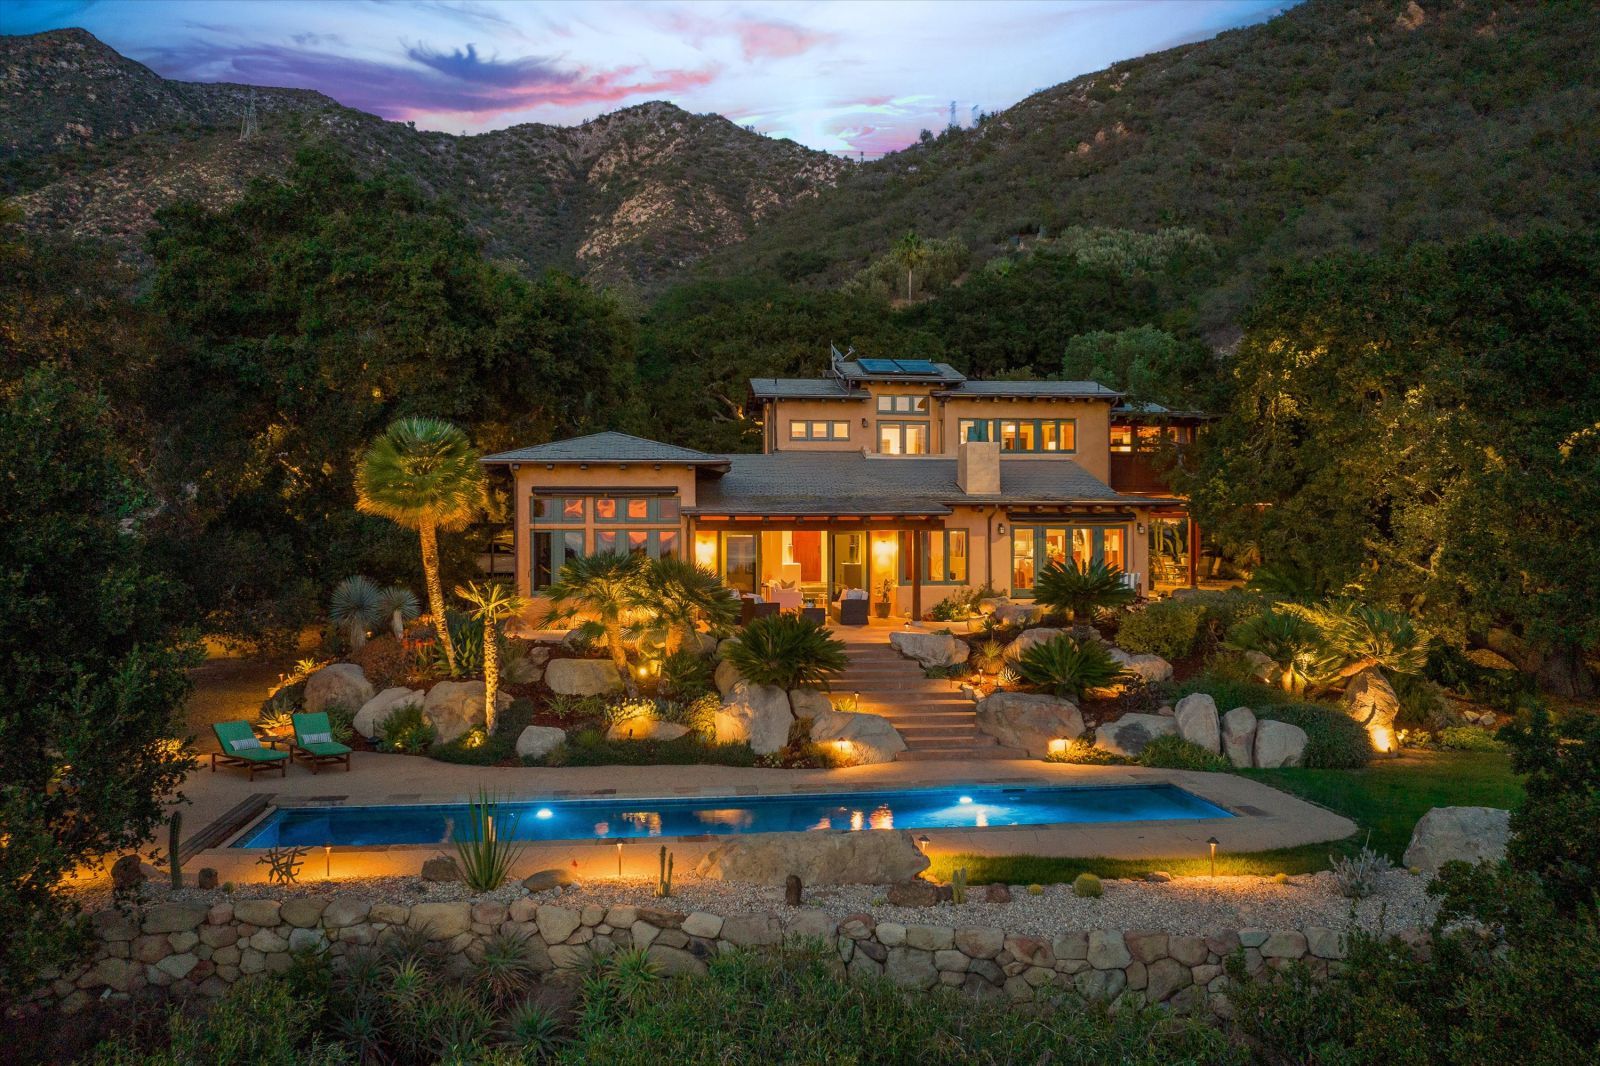 A beautiful Toro Canyon estate at sunset framed by mountains and a colorful sky with a pool in front of the illuminated home.